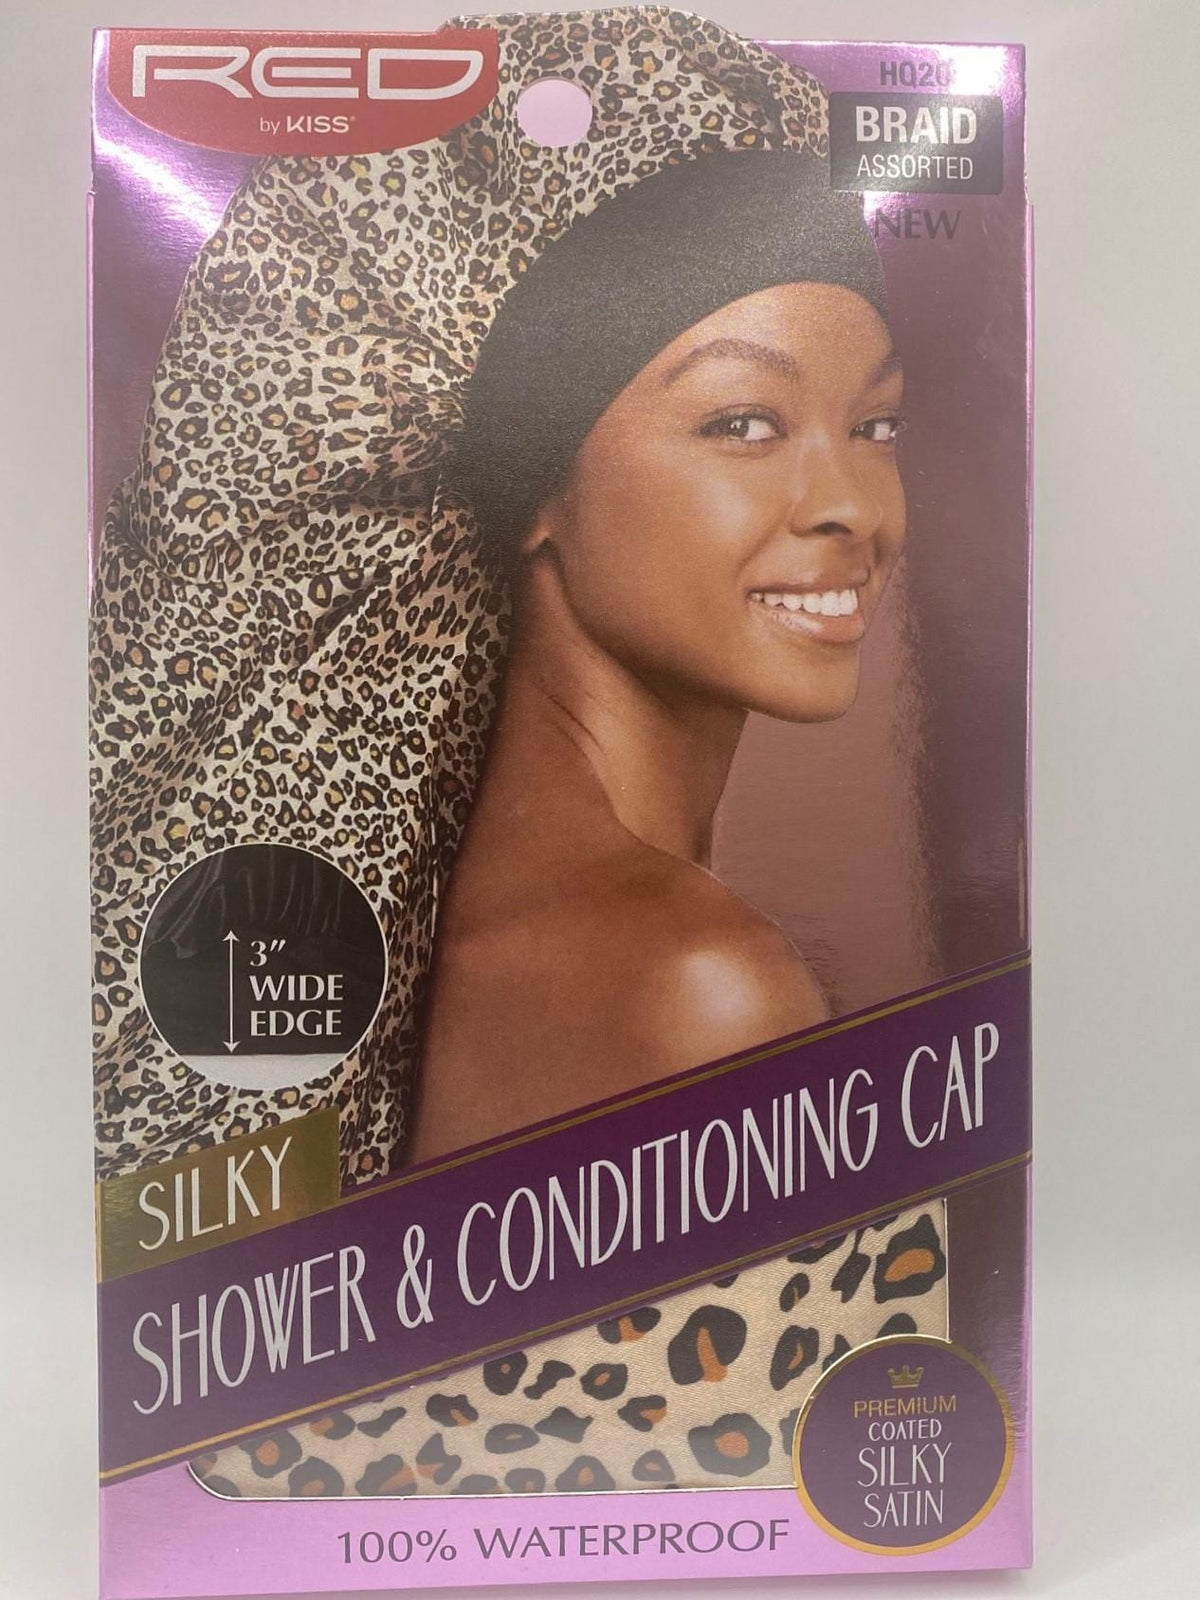 KISS SUPER JUMBO SHOWER & CONDITIONING SILKY CAP ASSORTED HQ 20